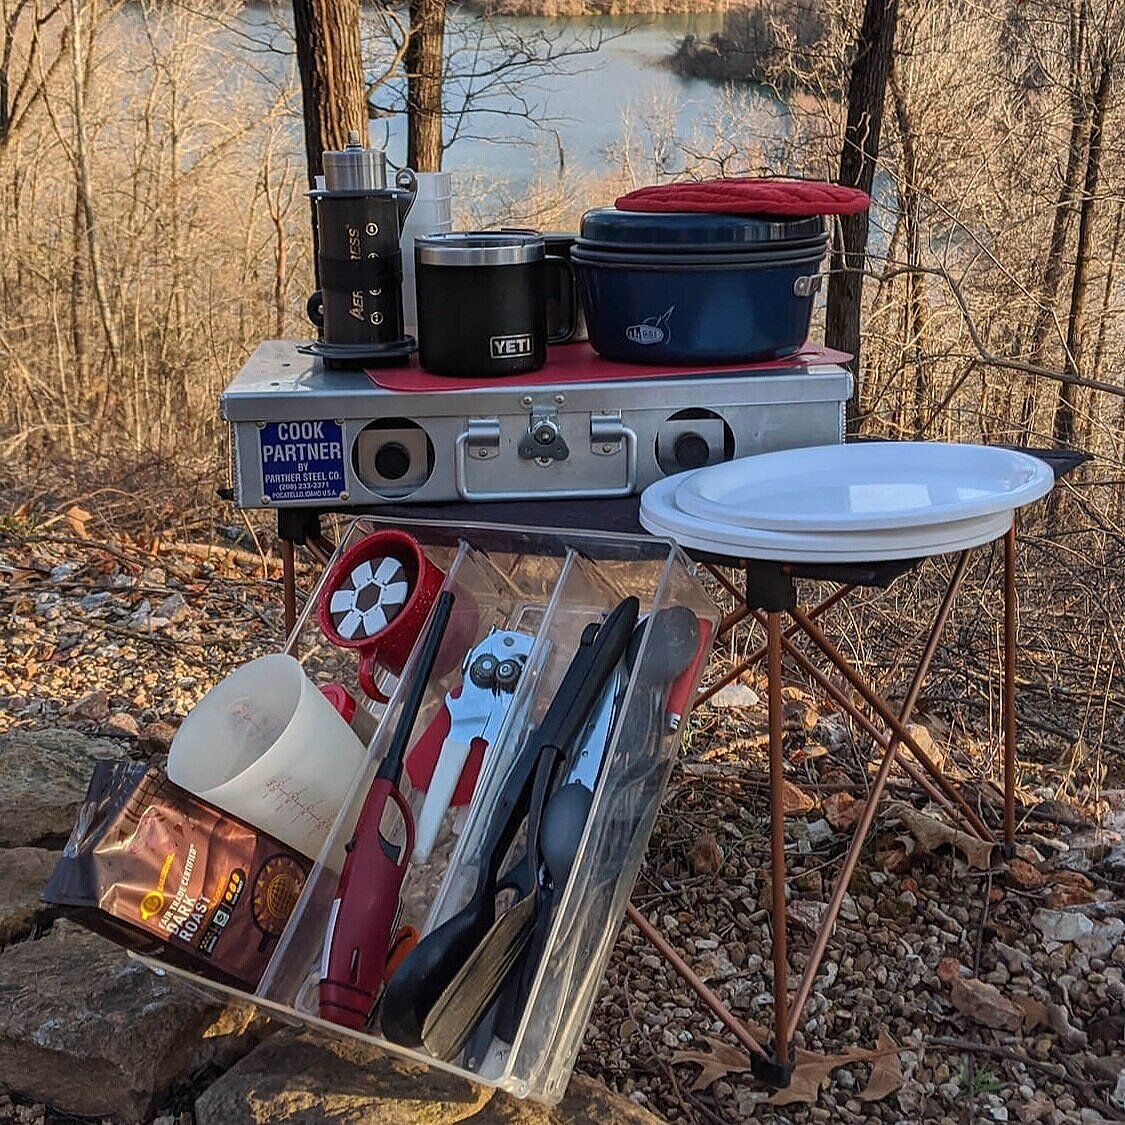 5 BBQ Tools And Accessories You Can Use as Camping Kitchen Gear